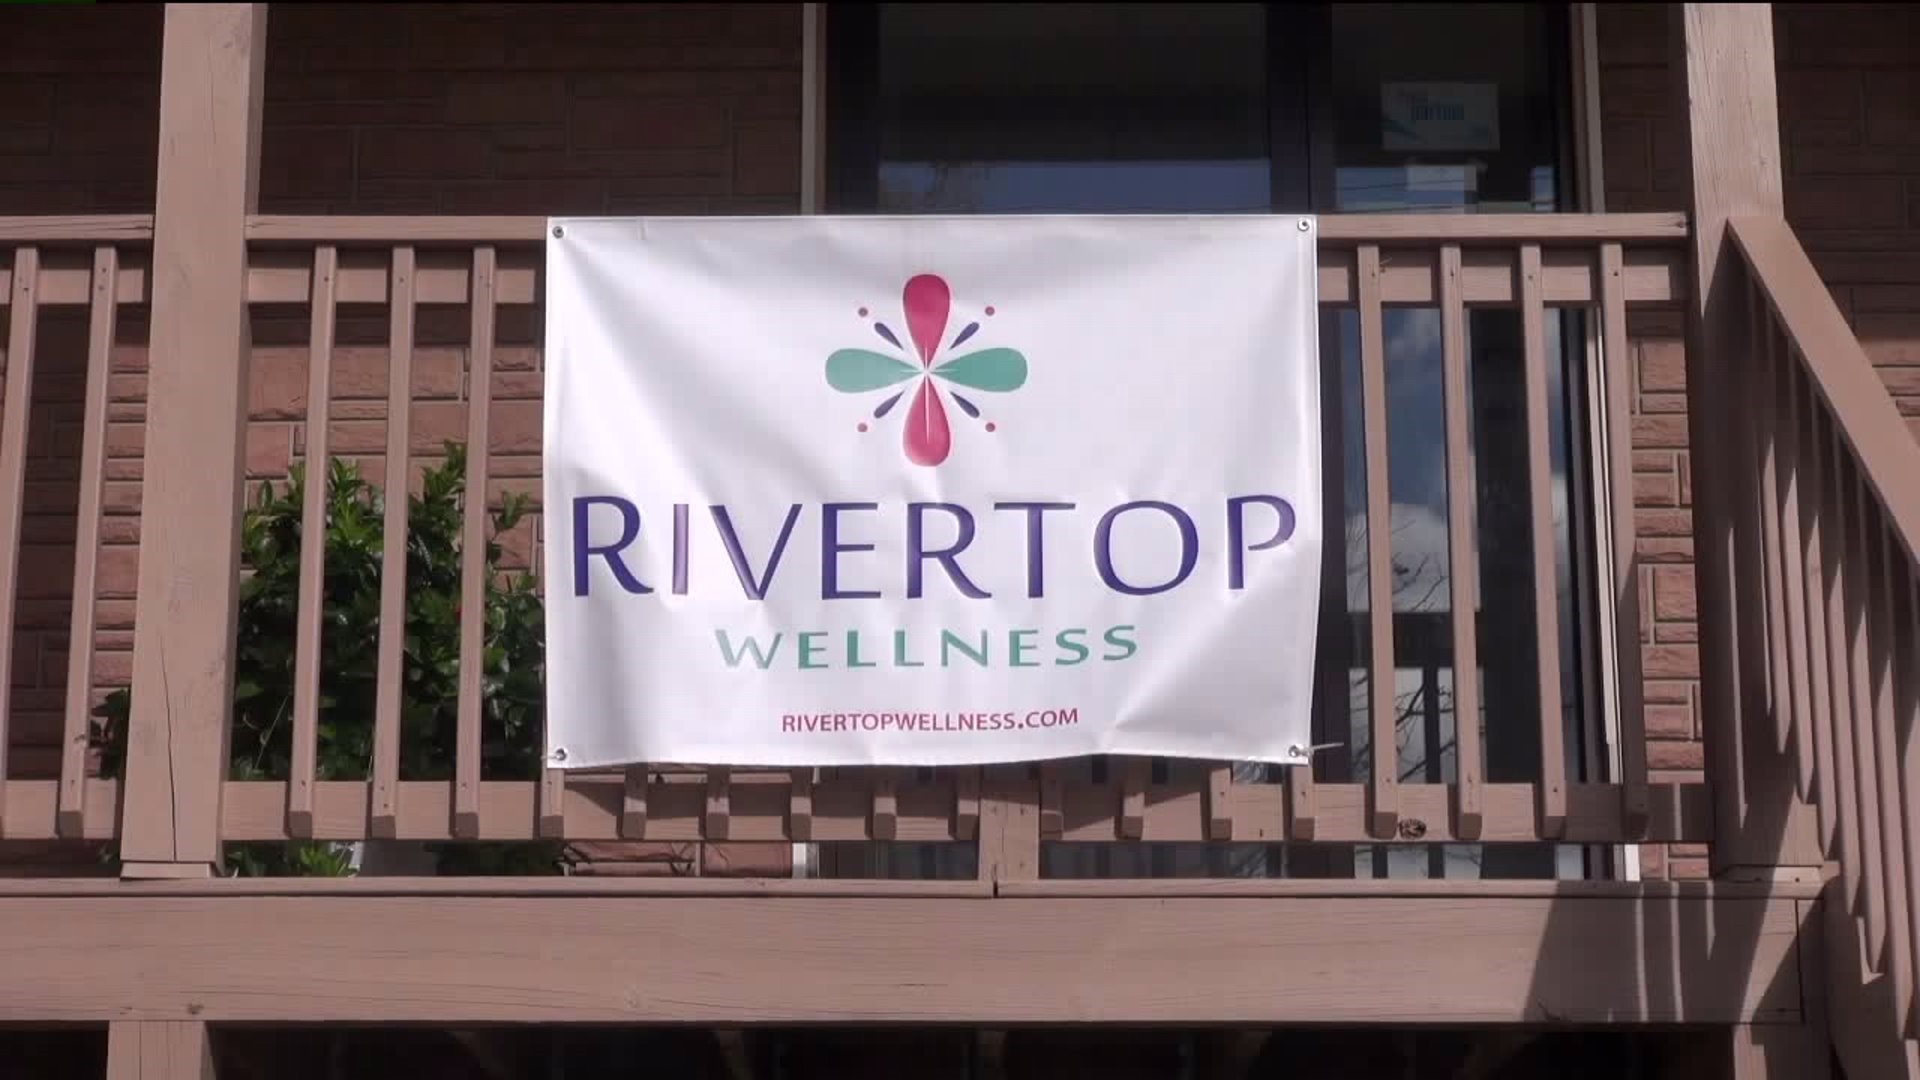 New Wellness Center in Wyoming County